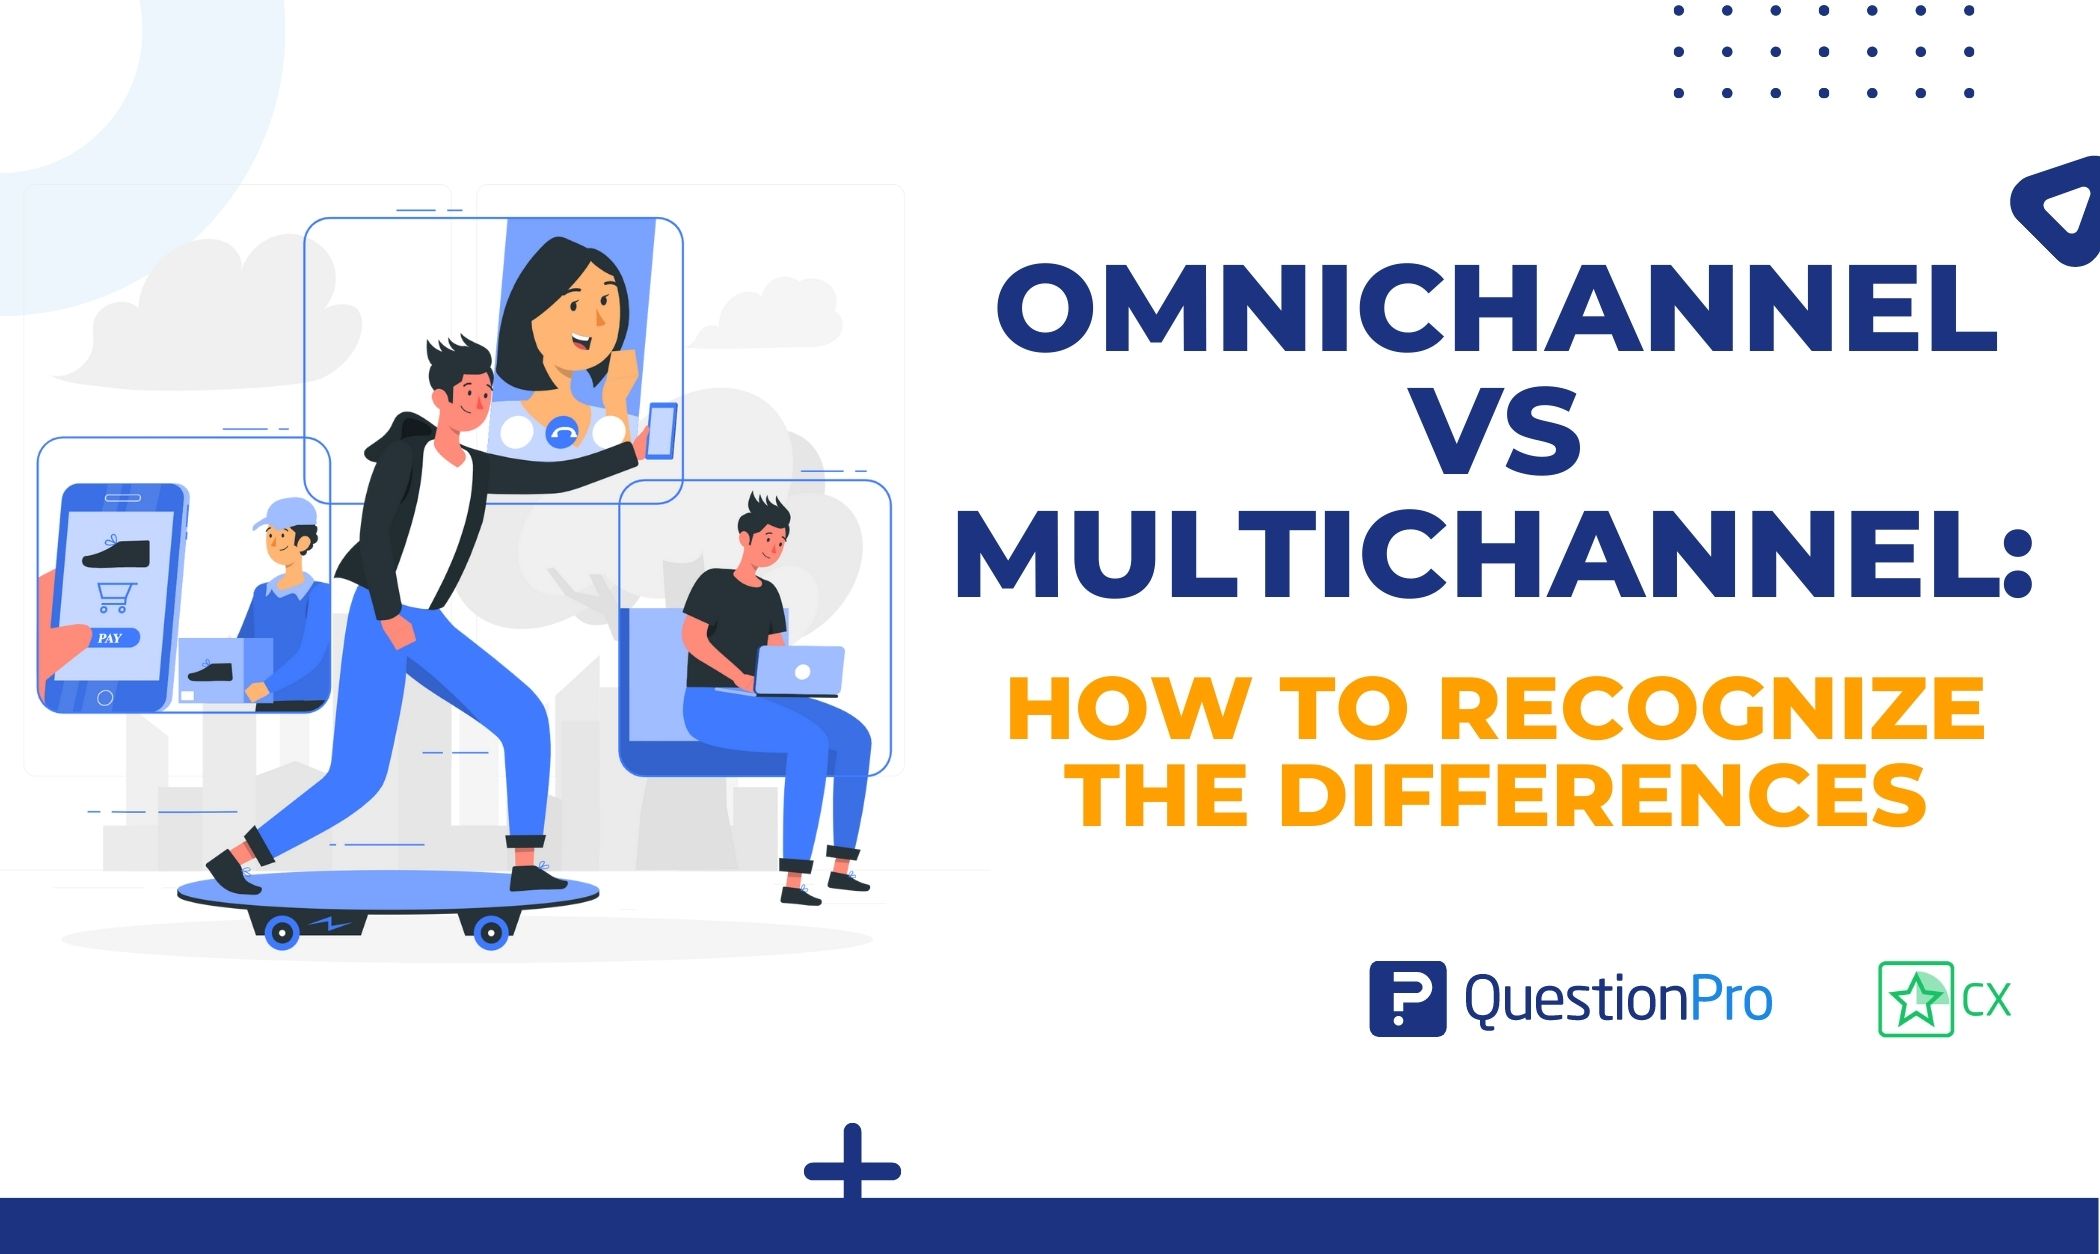 How to recognize the differences between Omnichannel vs Multichannel? One involves several channels, the other is multidirectional. Let's go.